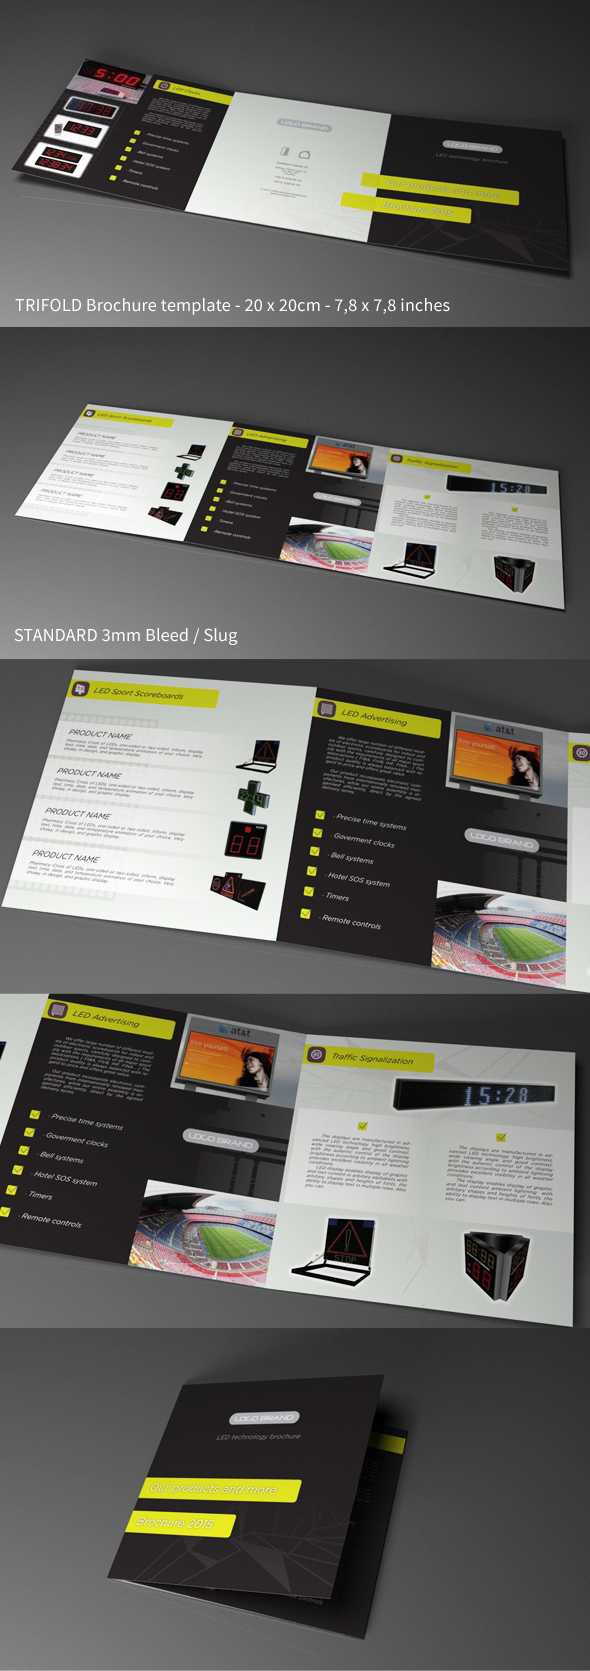 Free Indesign Template – Trifold Square Led Tech On Behance With Adobe Indesign Tri Fold Brochure Template